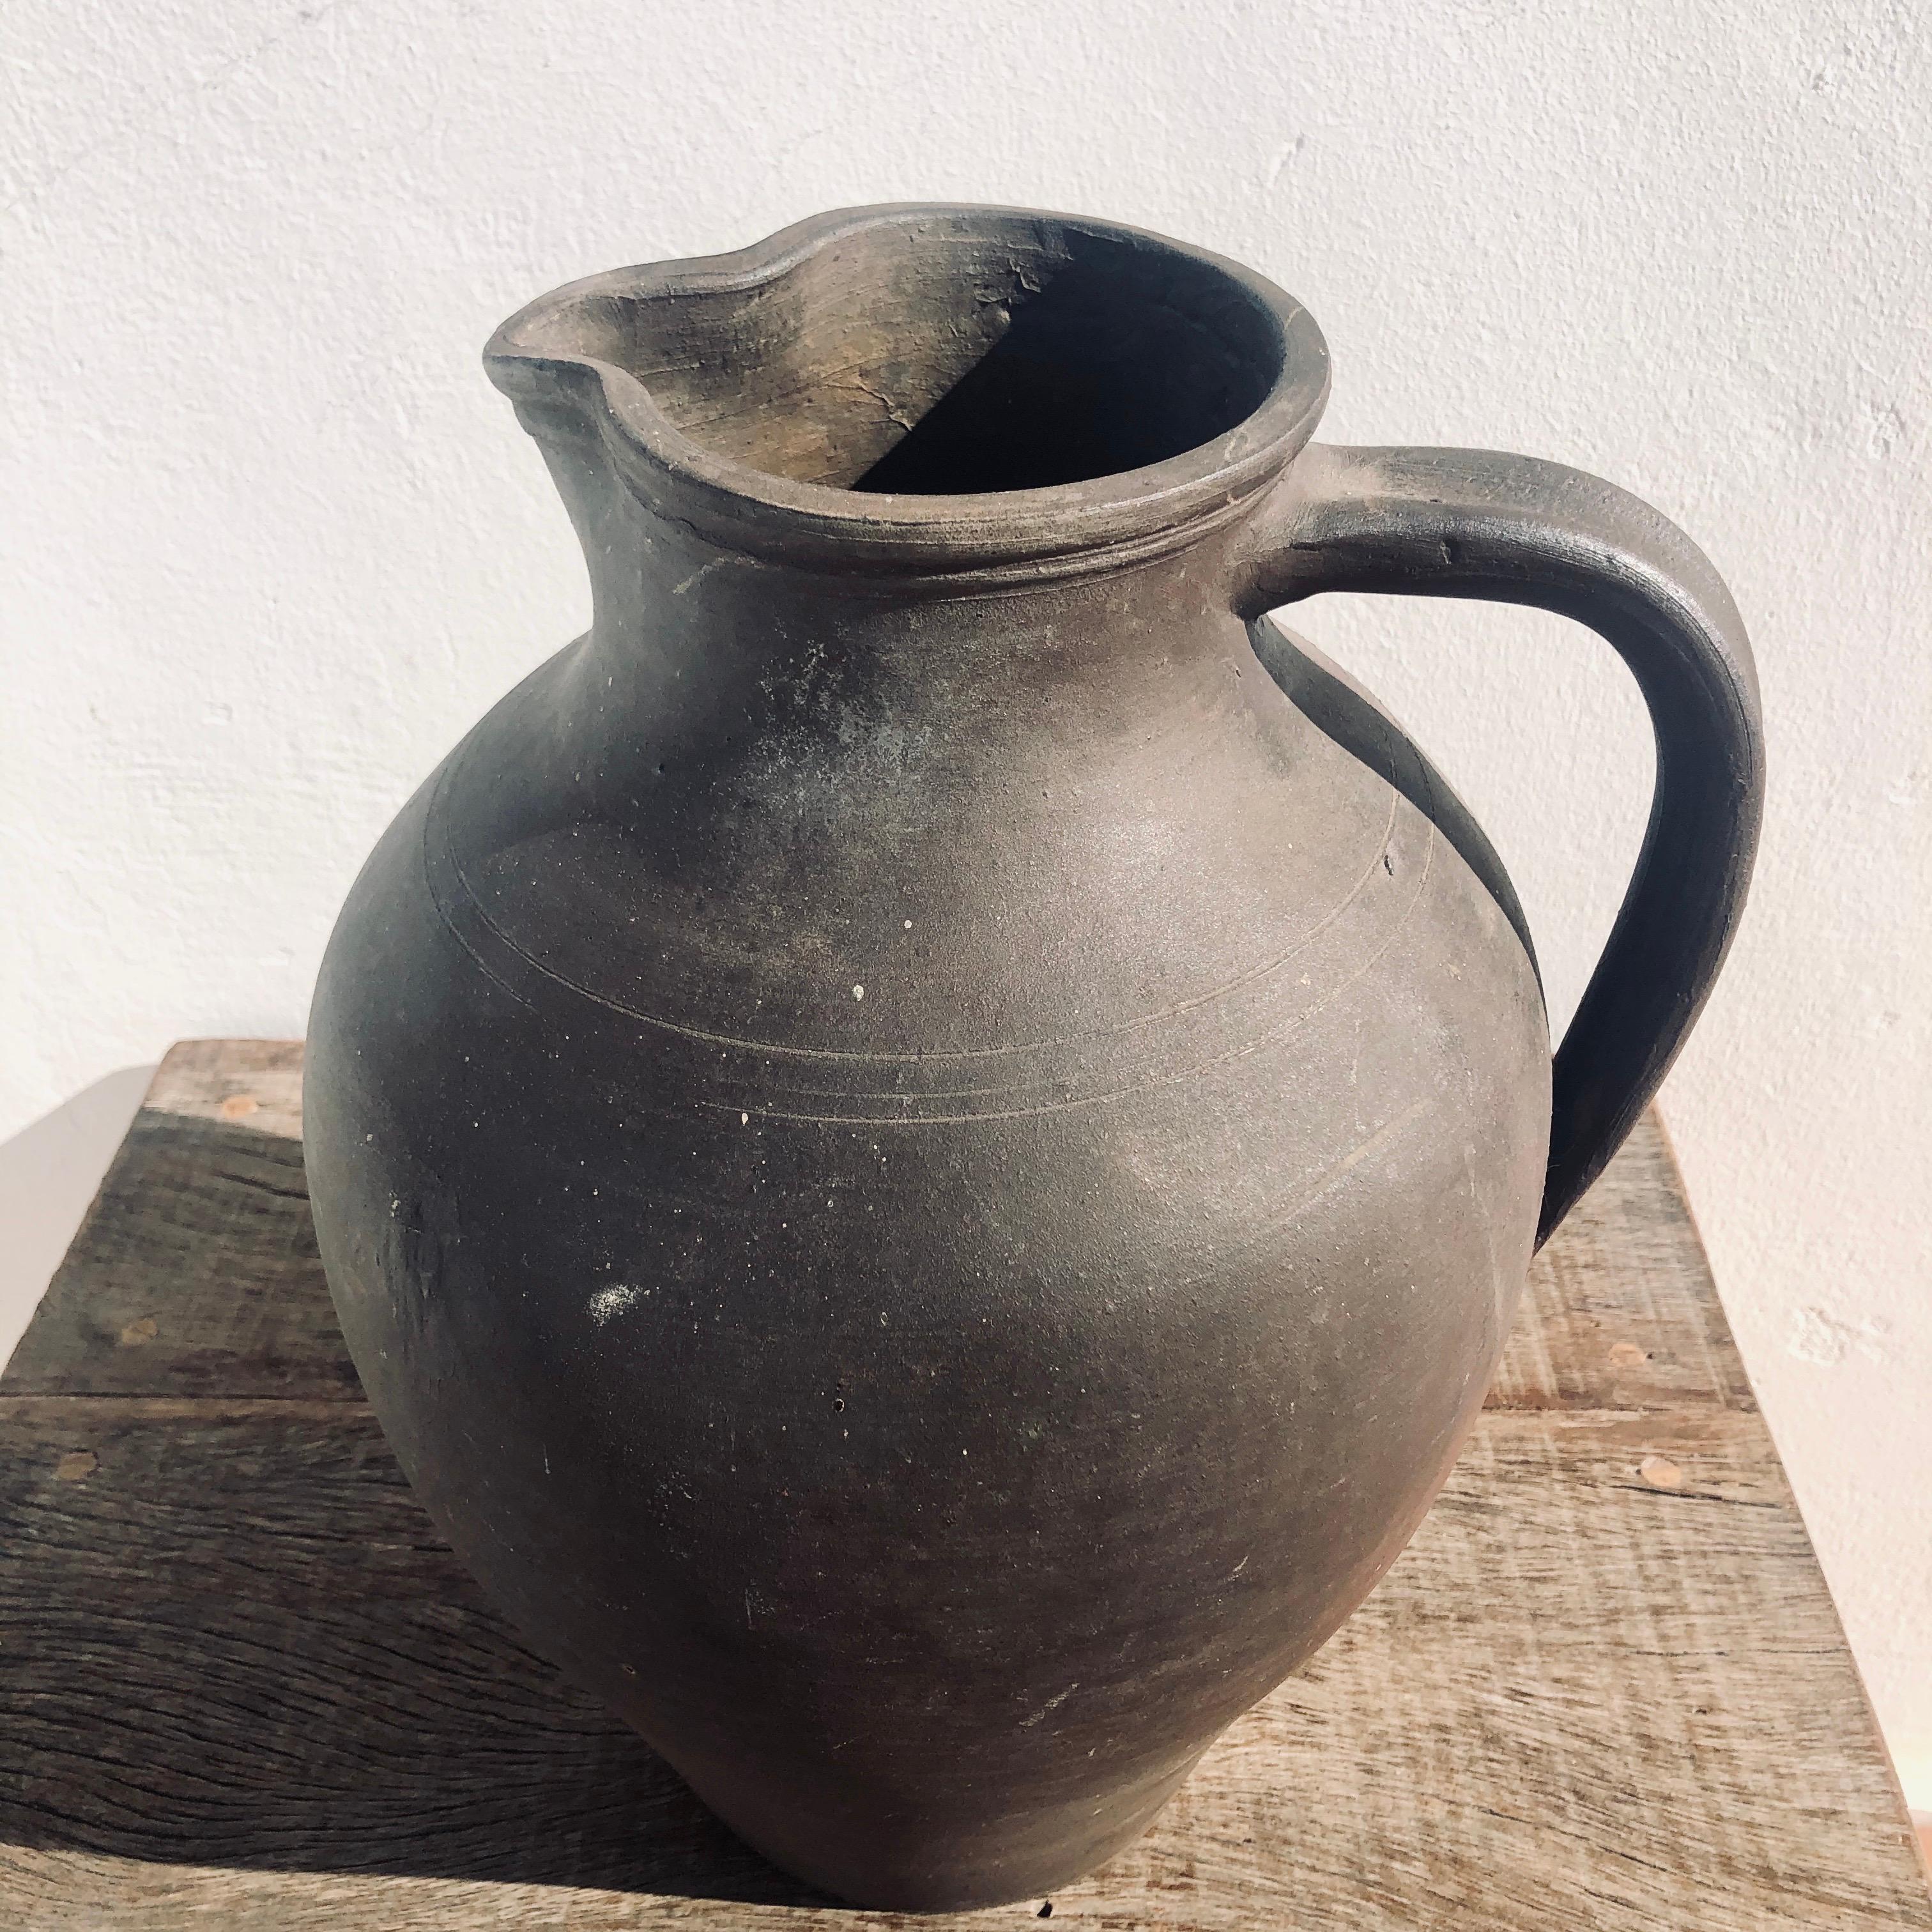 Gorgeous French 19th ceramic decorative pottery, used to storage liquids as oil or wine. It is in great original condition, it is believed to be from the Mid-1800s, it shows signs of its age and use, it's got few chips and perfect old patina marks